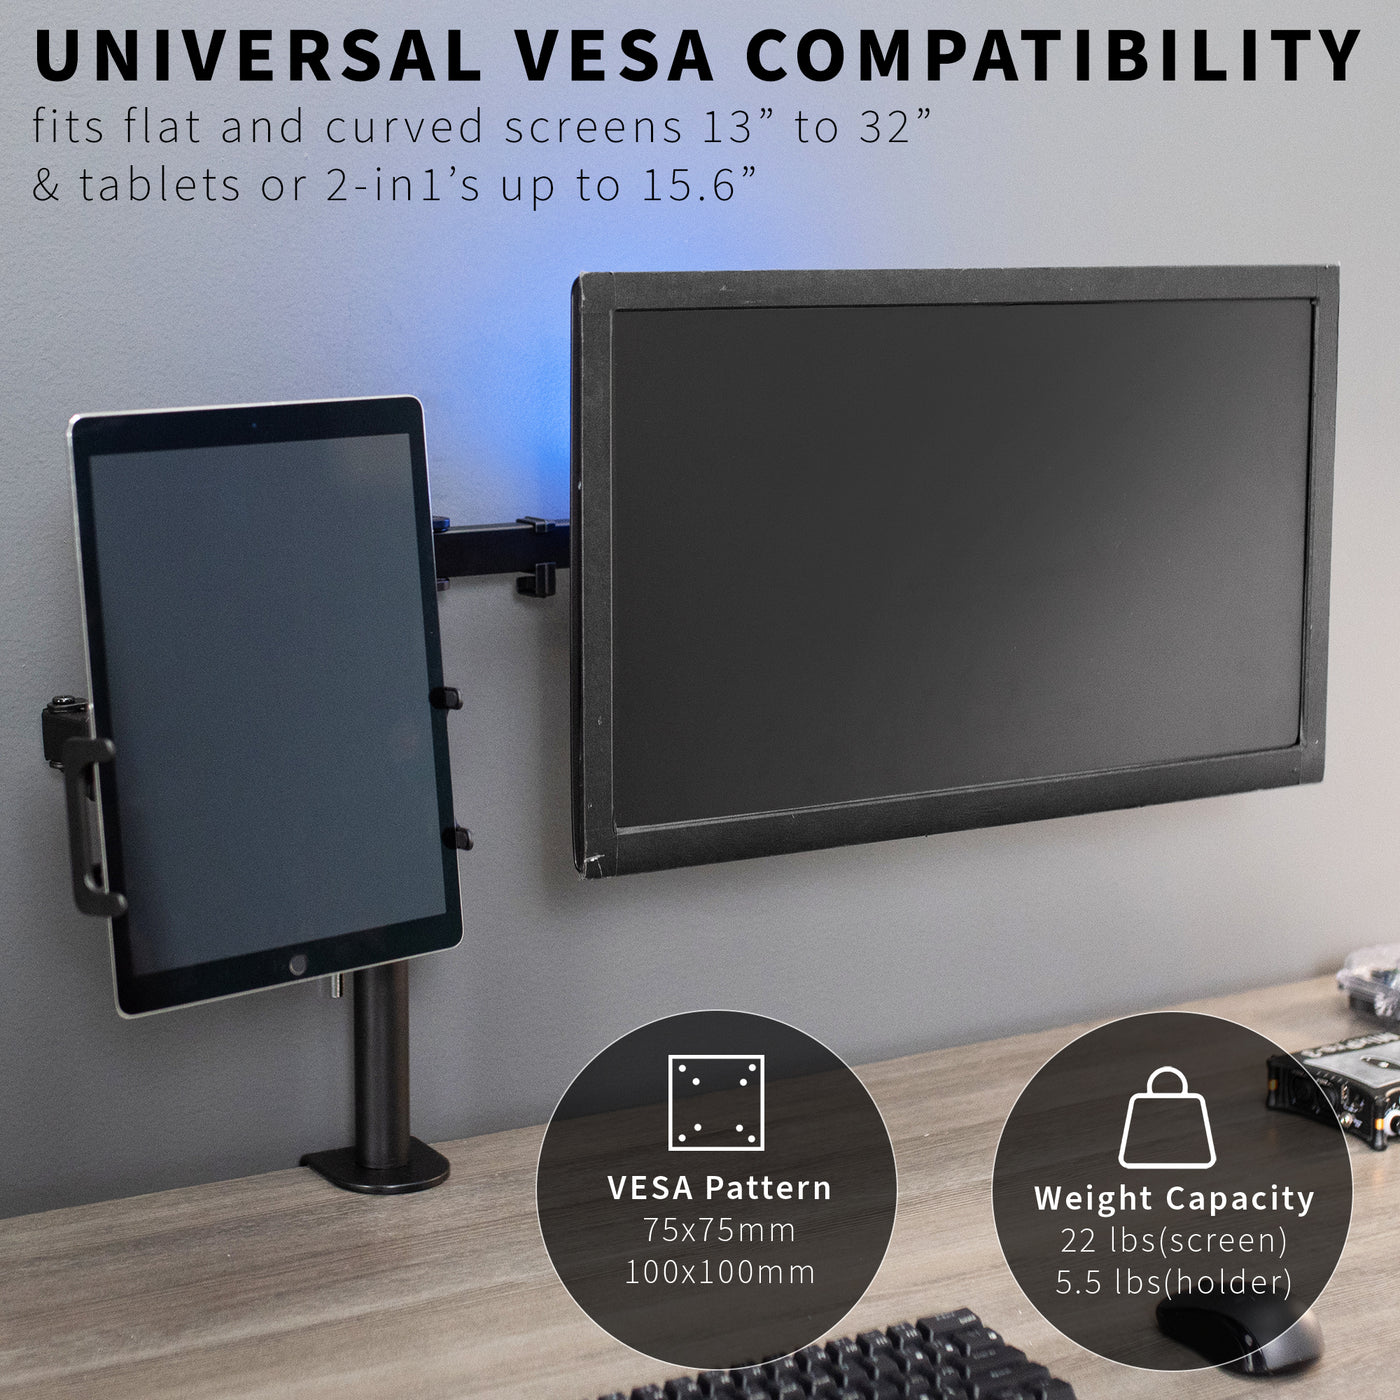 Sturdy single monitor and tablet desk mount with universal VESA compatibility.